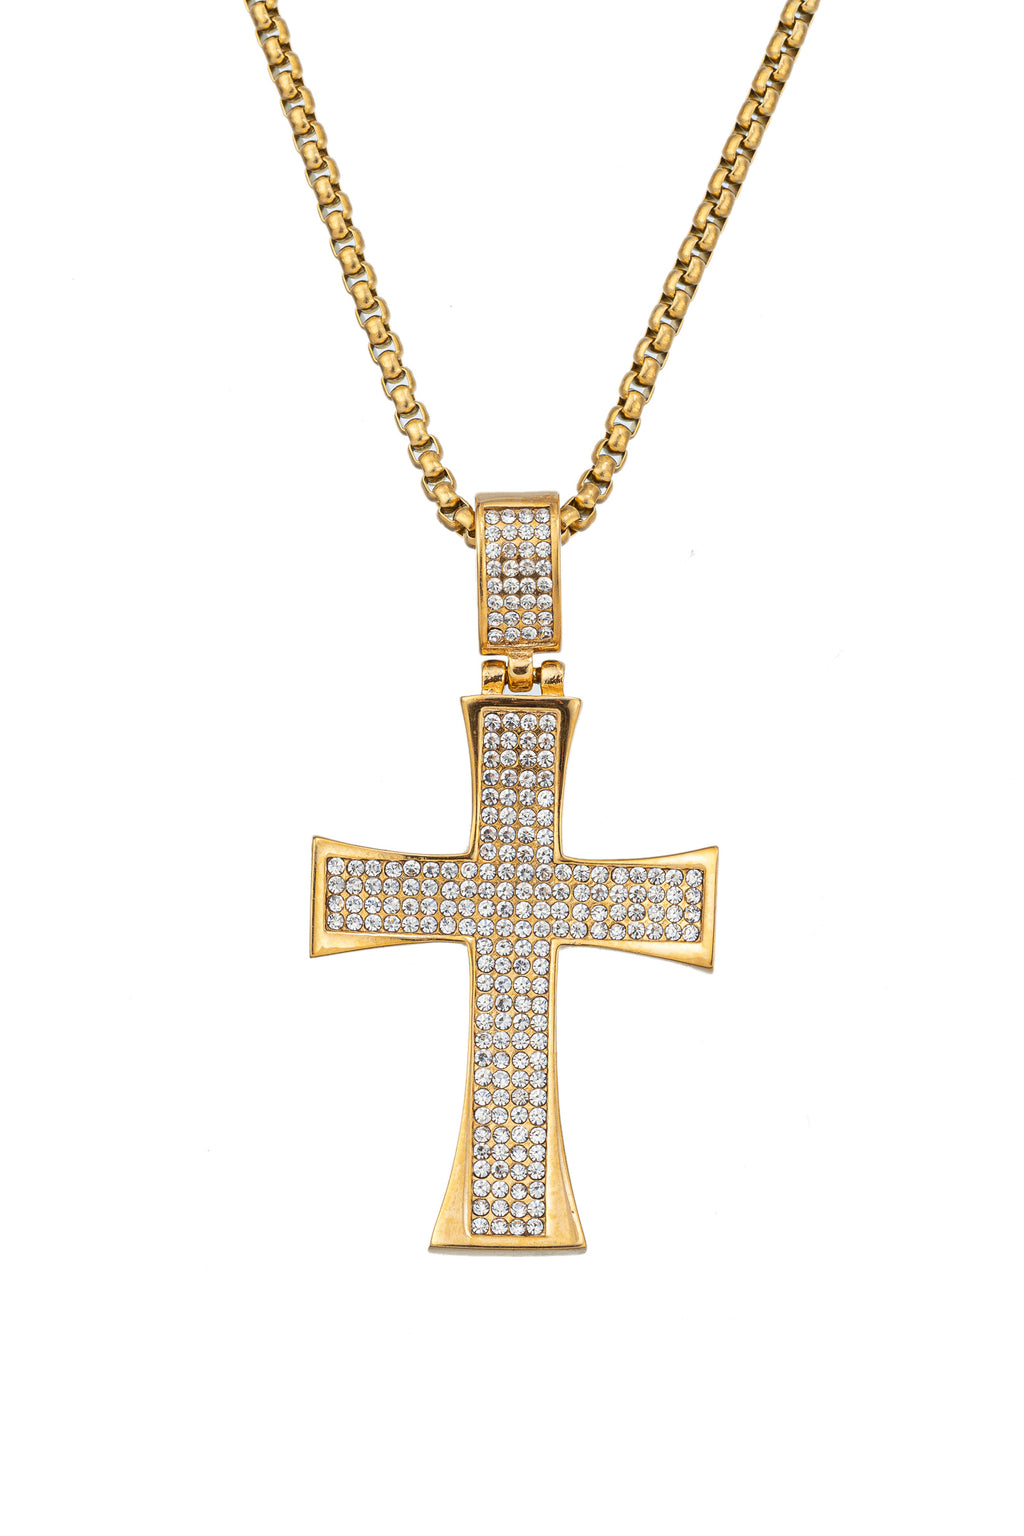 Gold tone titanium cross pendant necklace studded with CZ crystals.